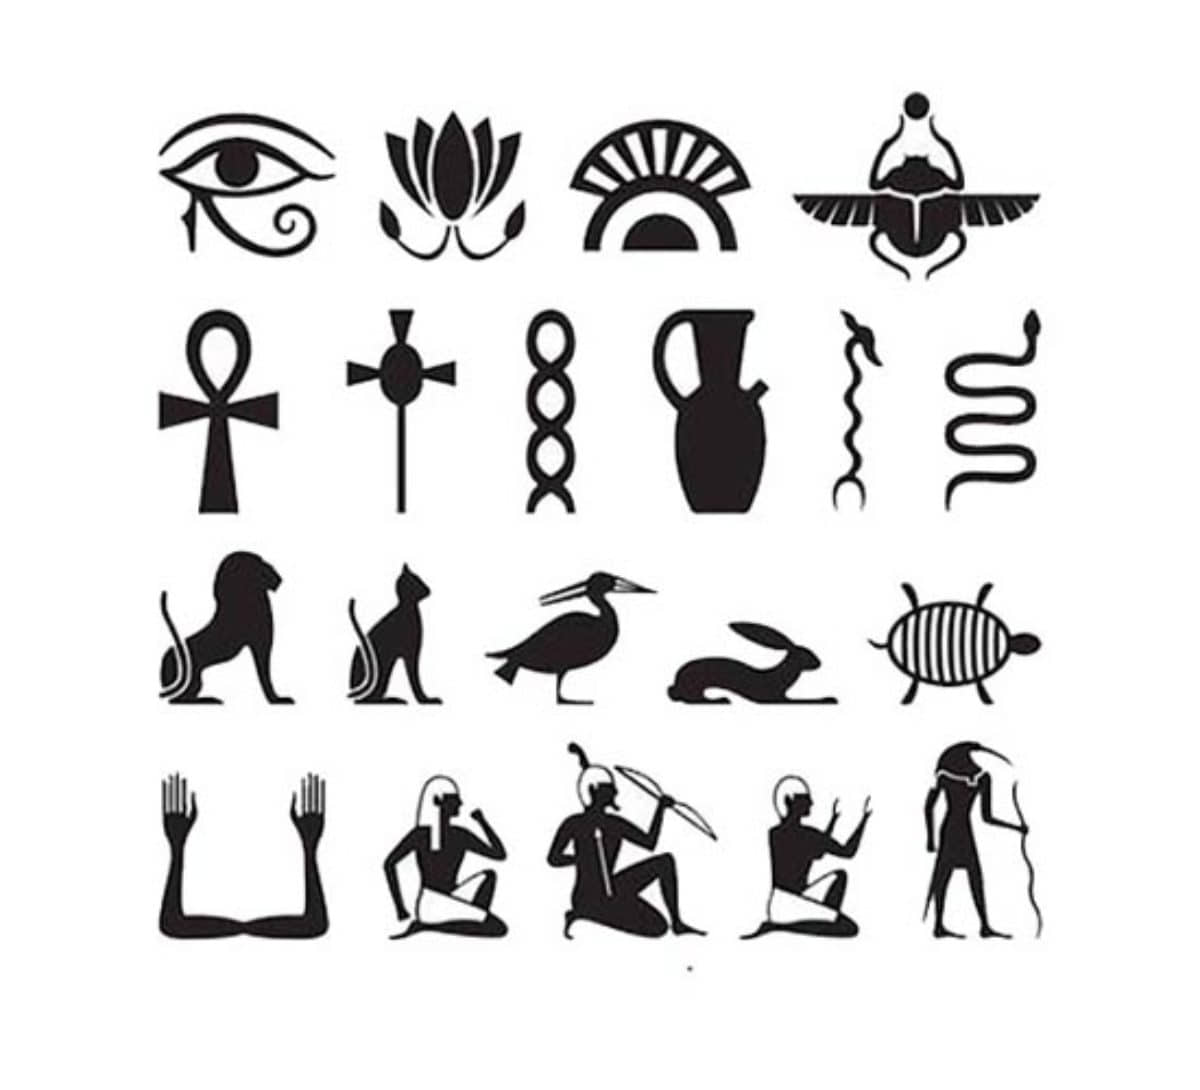 ancient-egyptian-word-for-earth-the-earth-images-revimage-org